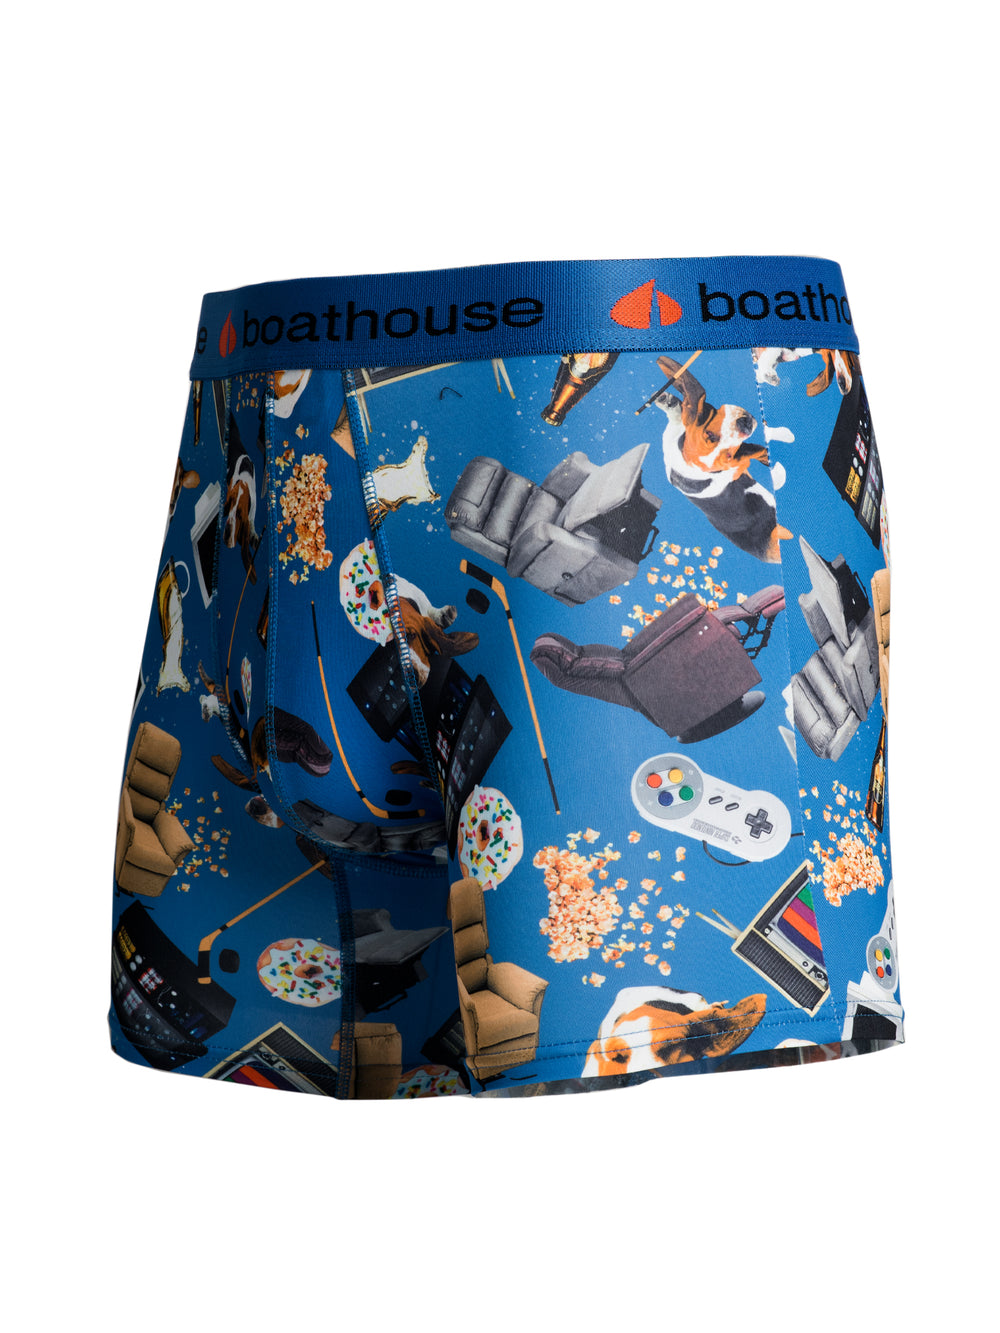 BOATHOUSE NOVELTY BOXER BRIEF - COUCH POTATO - CLEARANCE